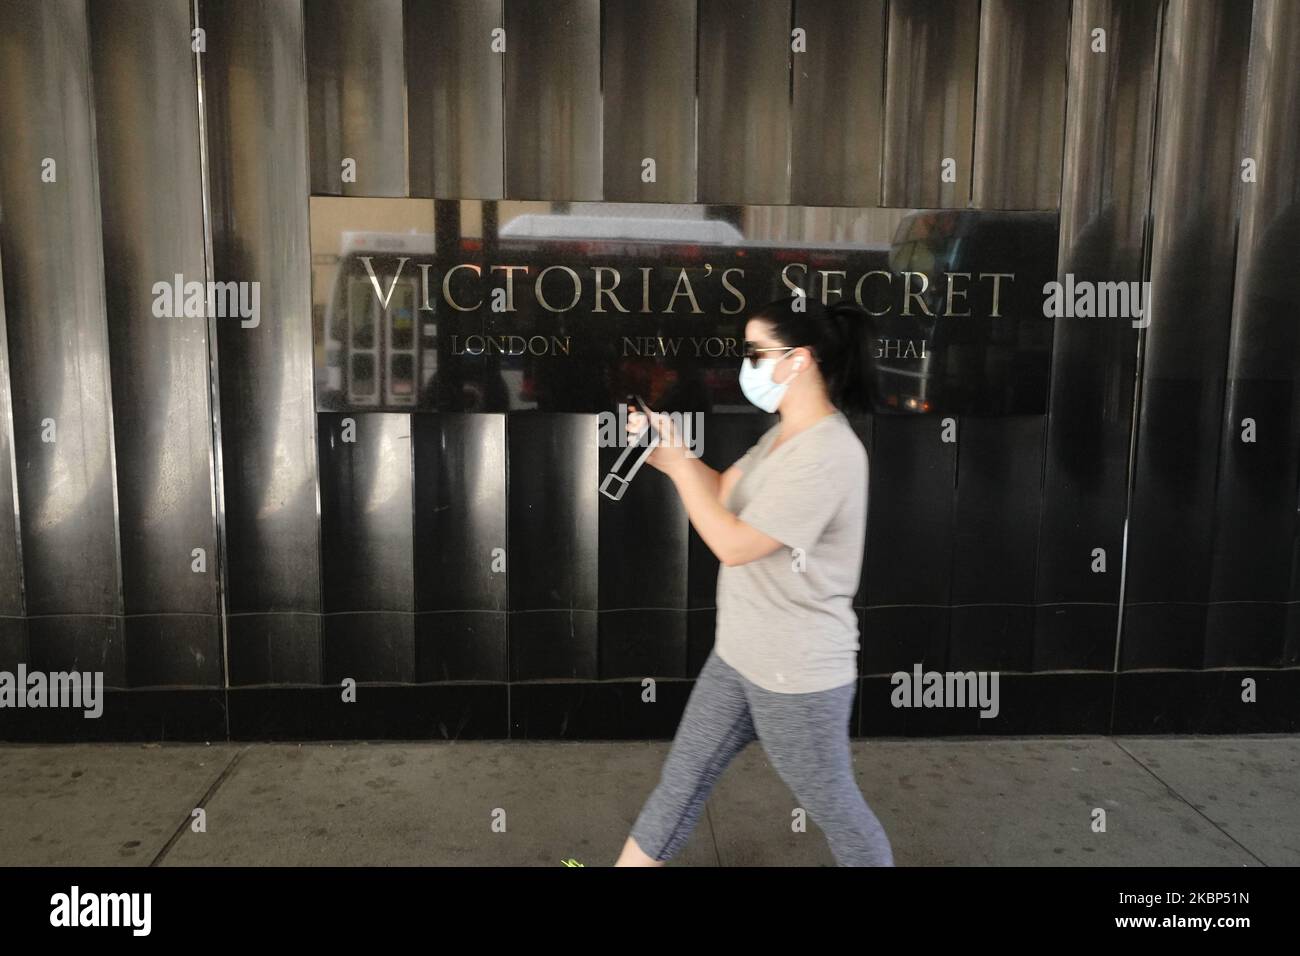 A view of Victoria’s Secret Store during the coronavirus pandemic on May 20, 2020 in 5th Ave., New York City. COVID-19 has spread to most countries around the world, claiming over 316,000 lives with over 4.8 million infections reported. Victoria's Secret to close about 250 stores in the U.S. and Canada. (Photo by John Nacion/NurPhoto) Stock Photo